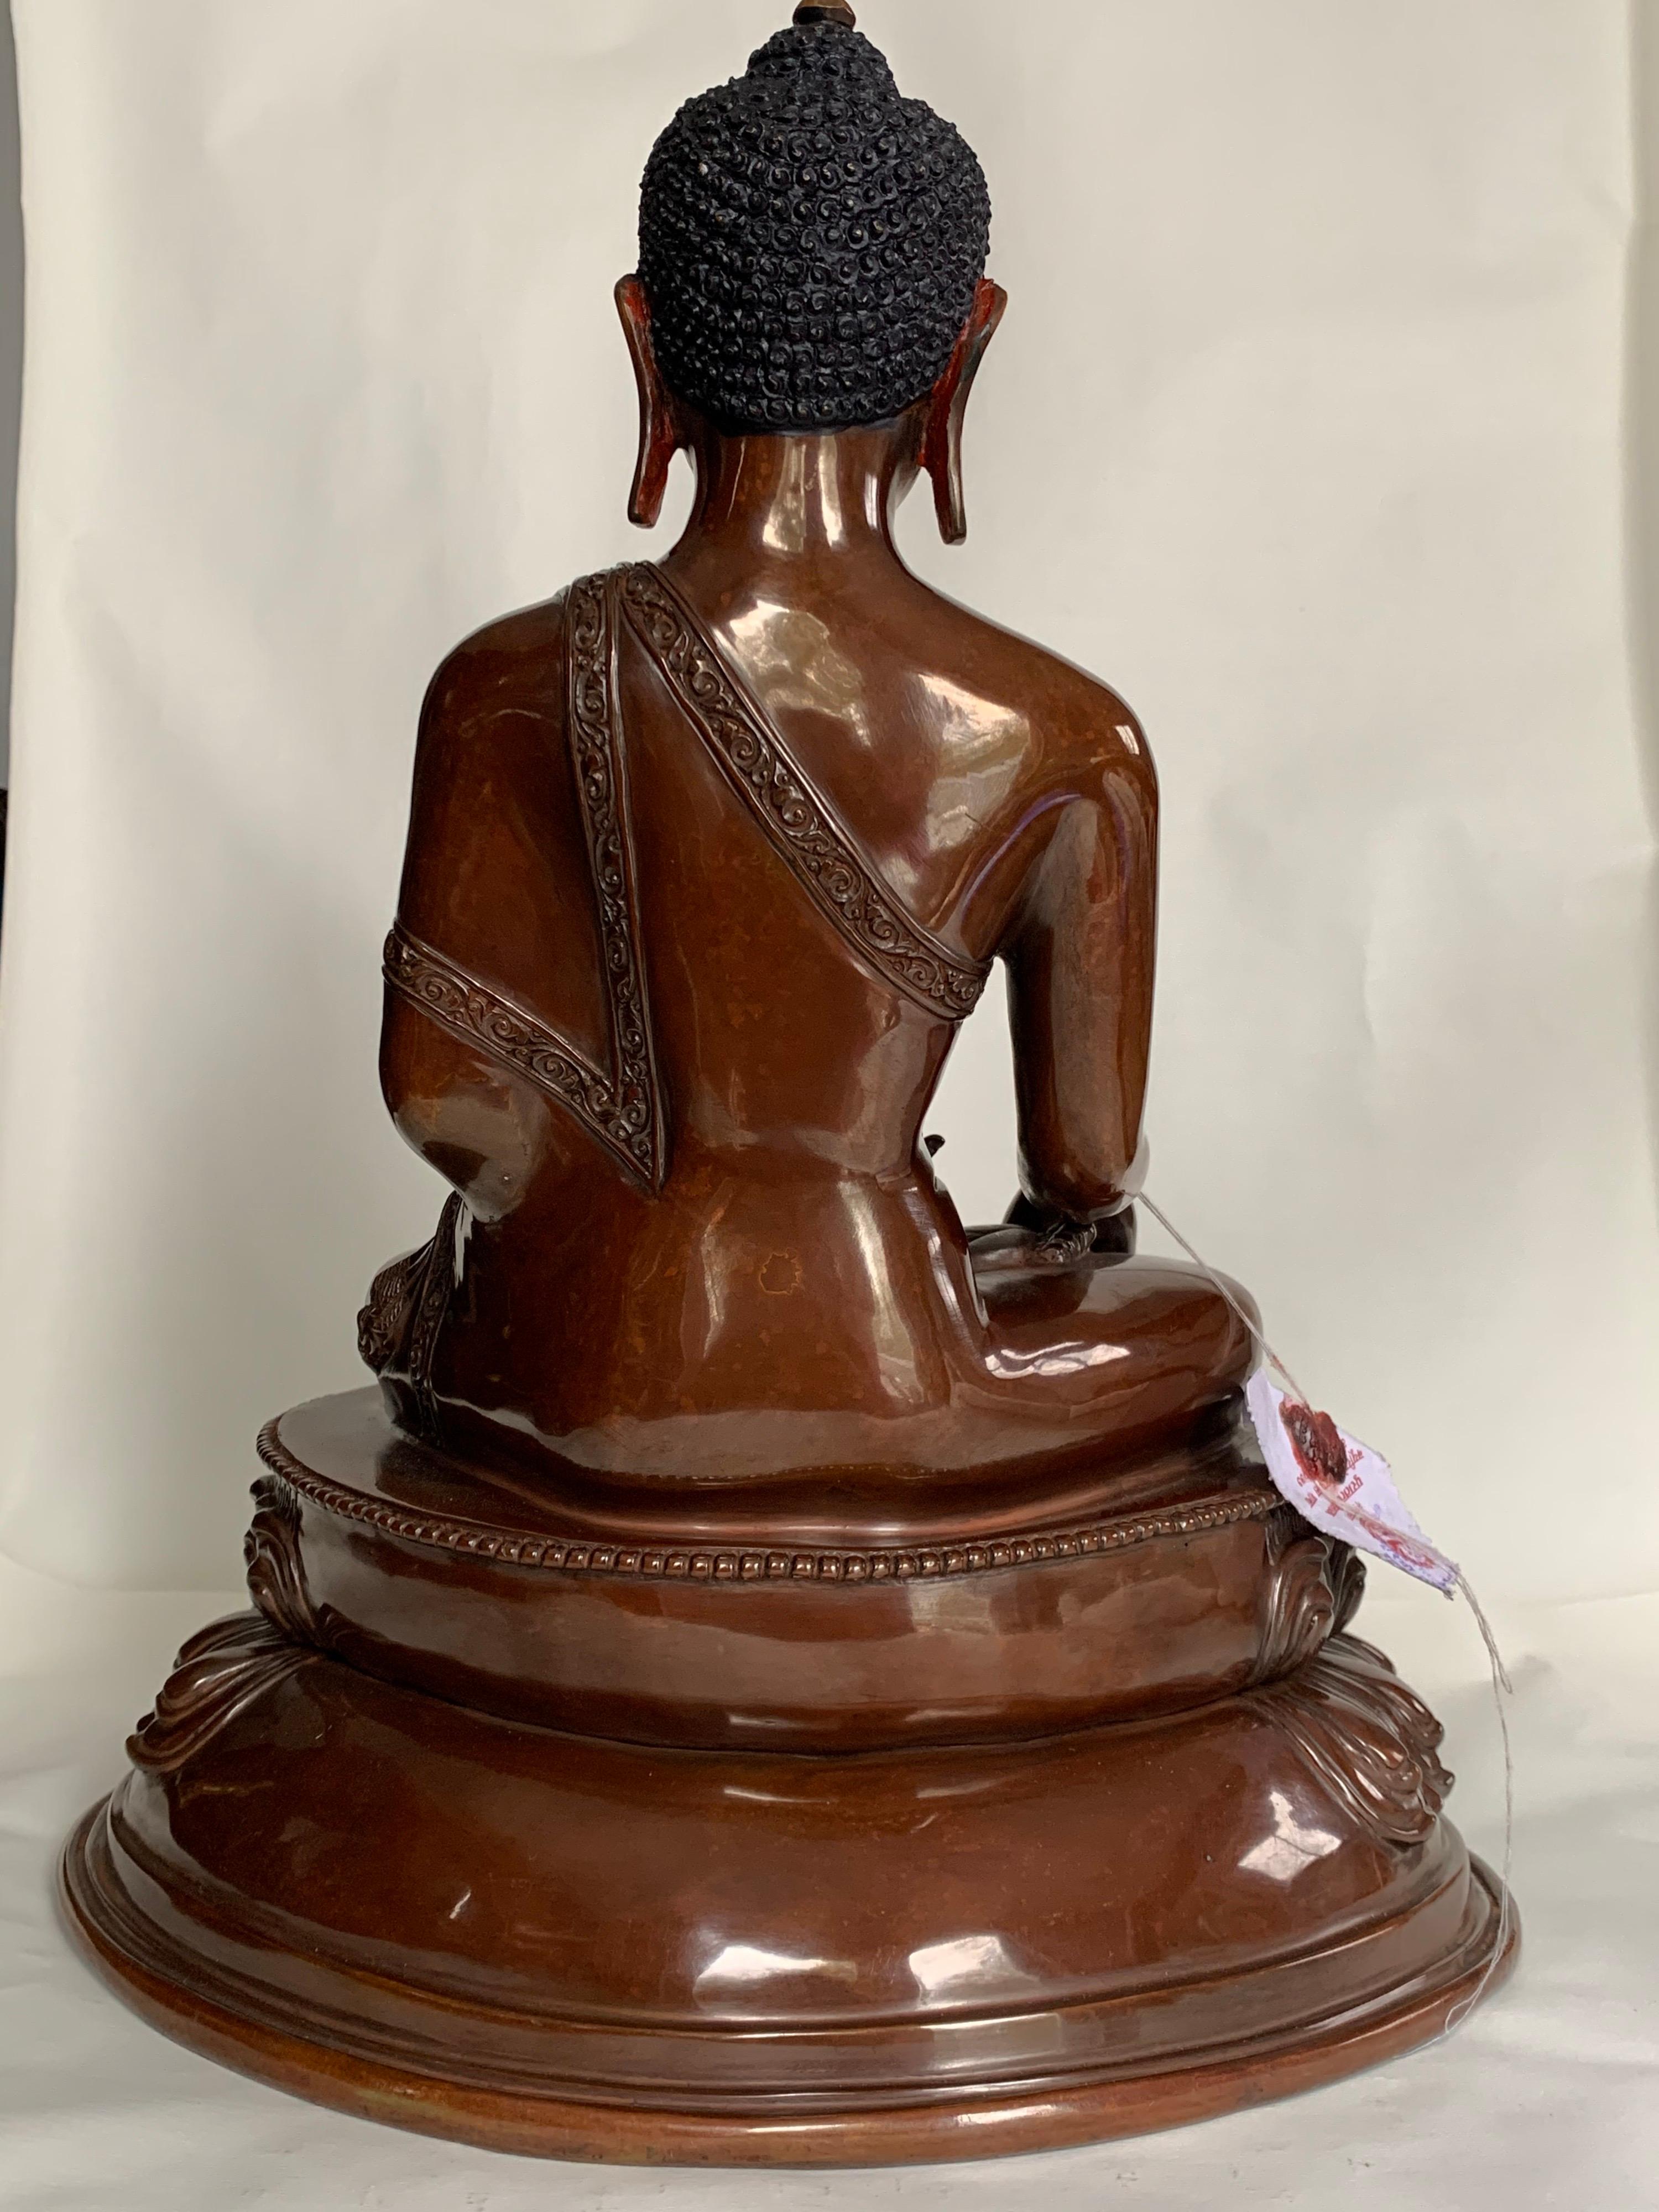 Buddha Statue 12 Inch Handcrafted by Lost Wax Process - Other Art Style Sculpture by Unknown